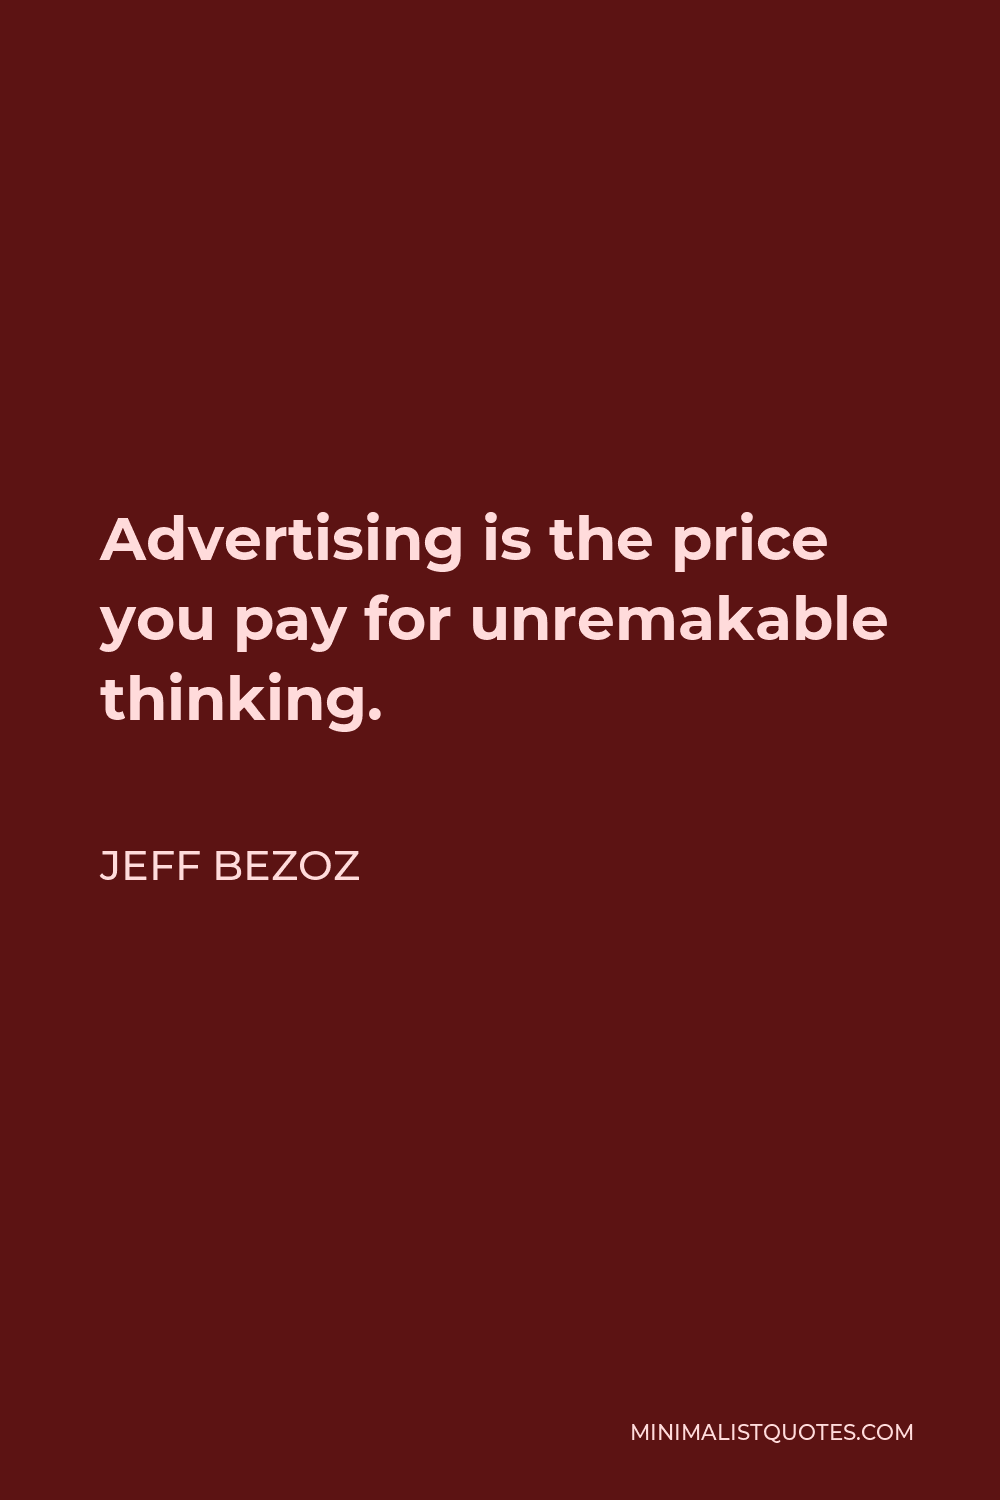 Jeff Bezoz Quote - Advertising is the price you pay for unremakable thinking.